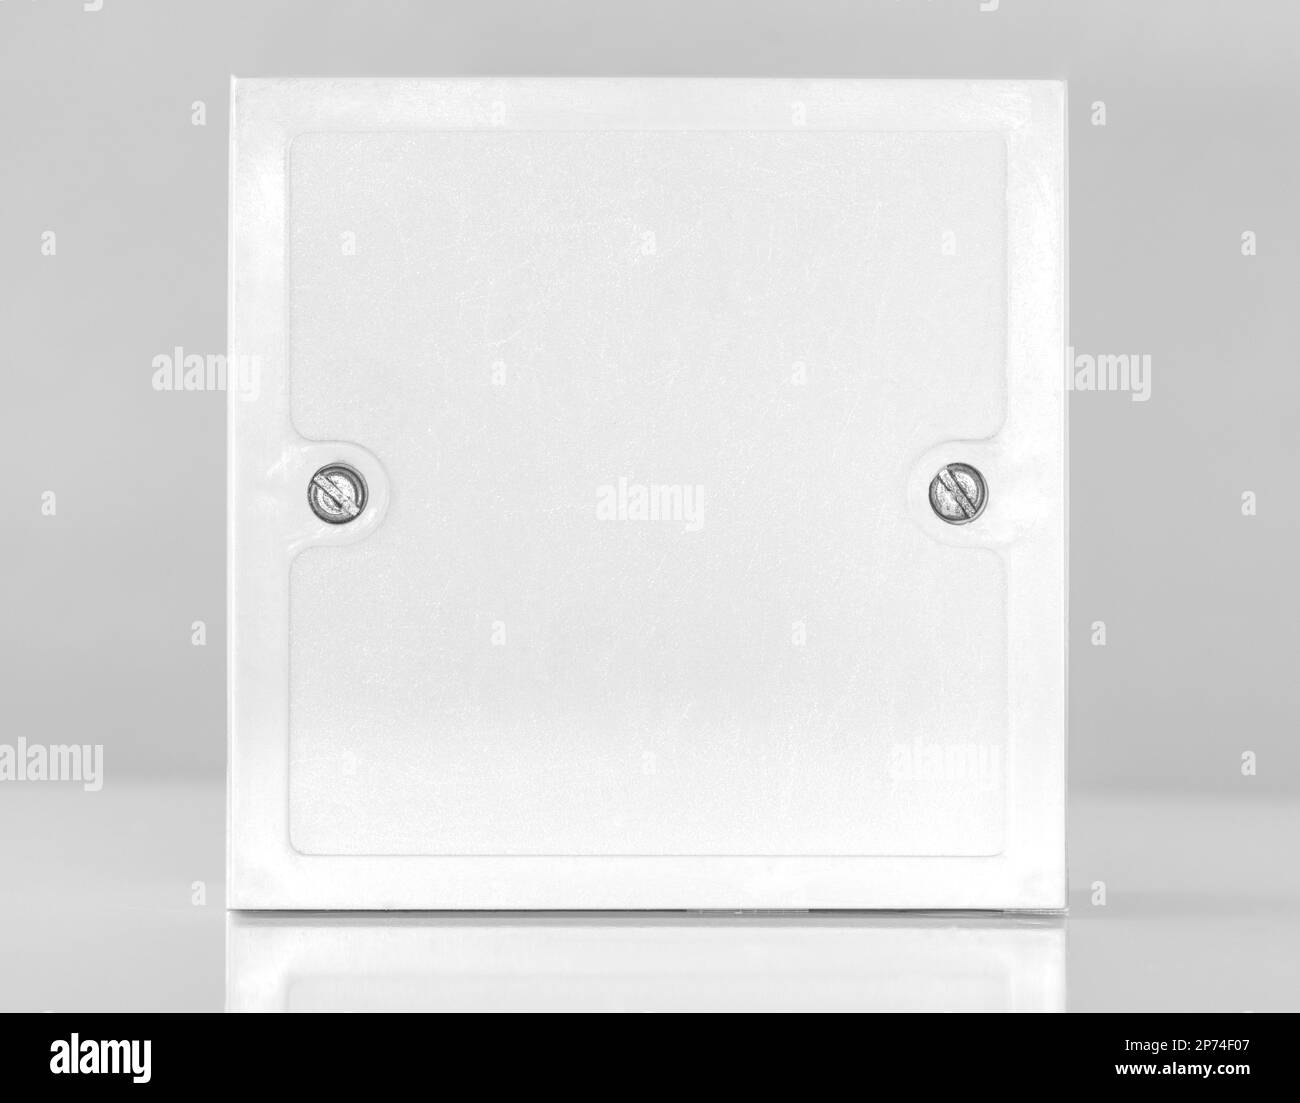 Small white square electrical junction box from the front view Stock Photo